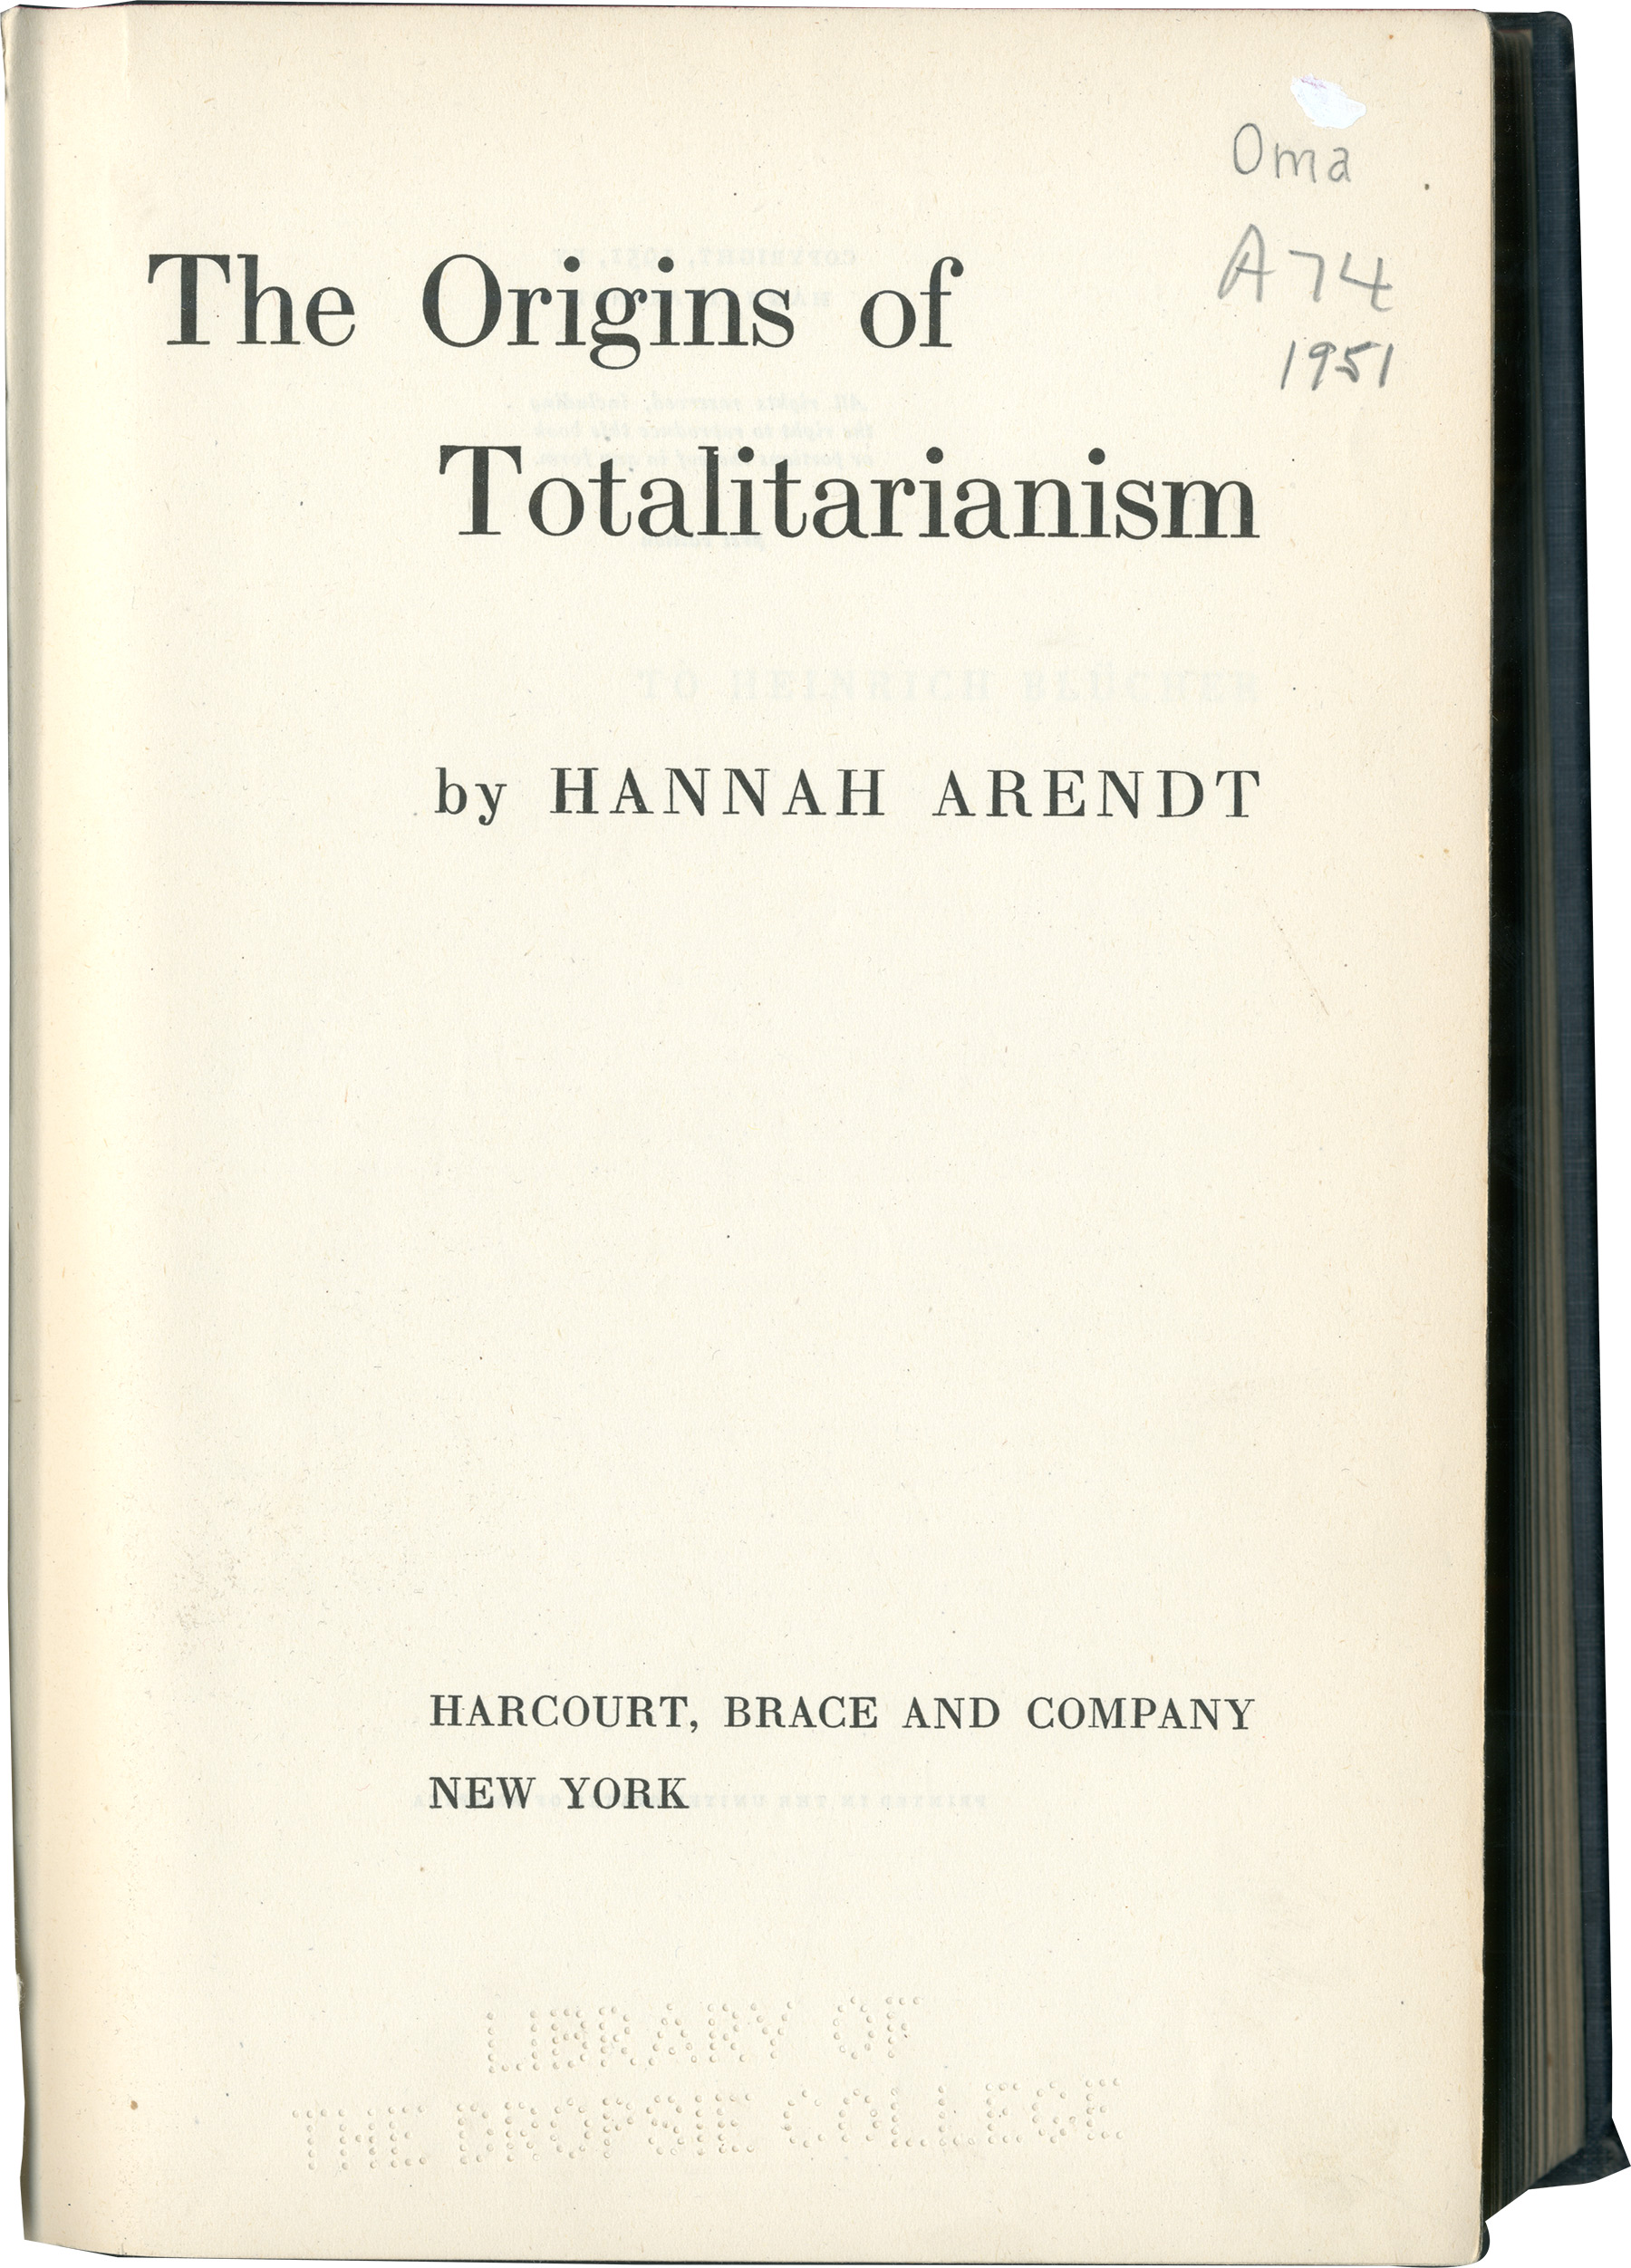 The Origins of Totalitarianism, title page